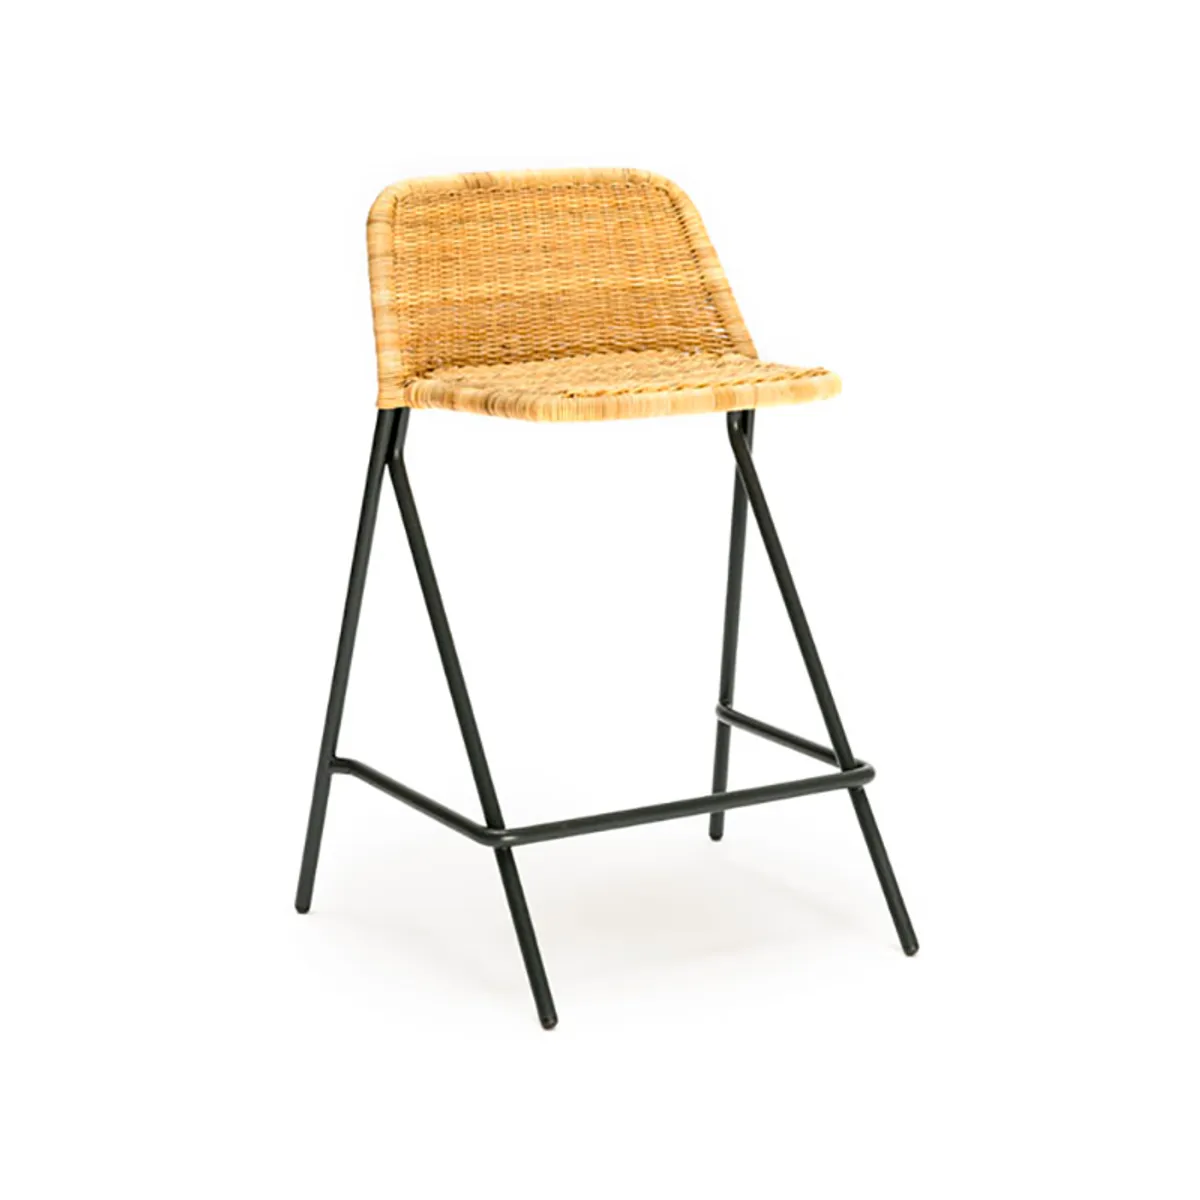 Persi Stool With Backrest Natural Rattan And Metal Stool For Furnishing Pubs And Garden Bars2 J